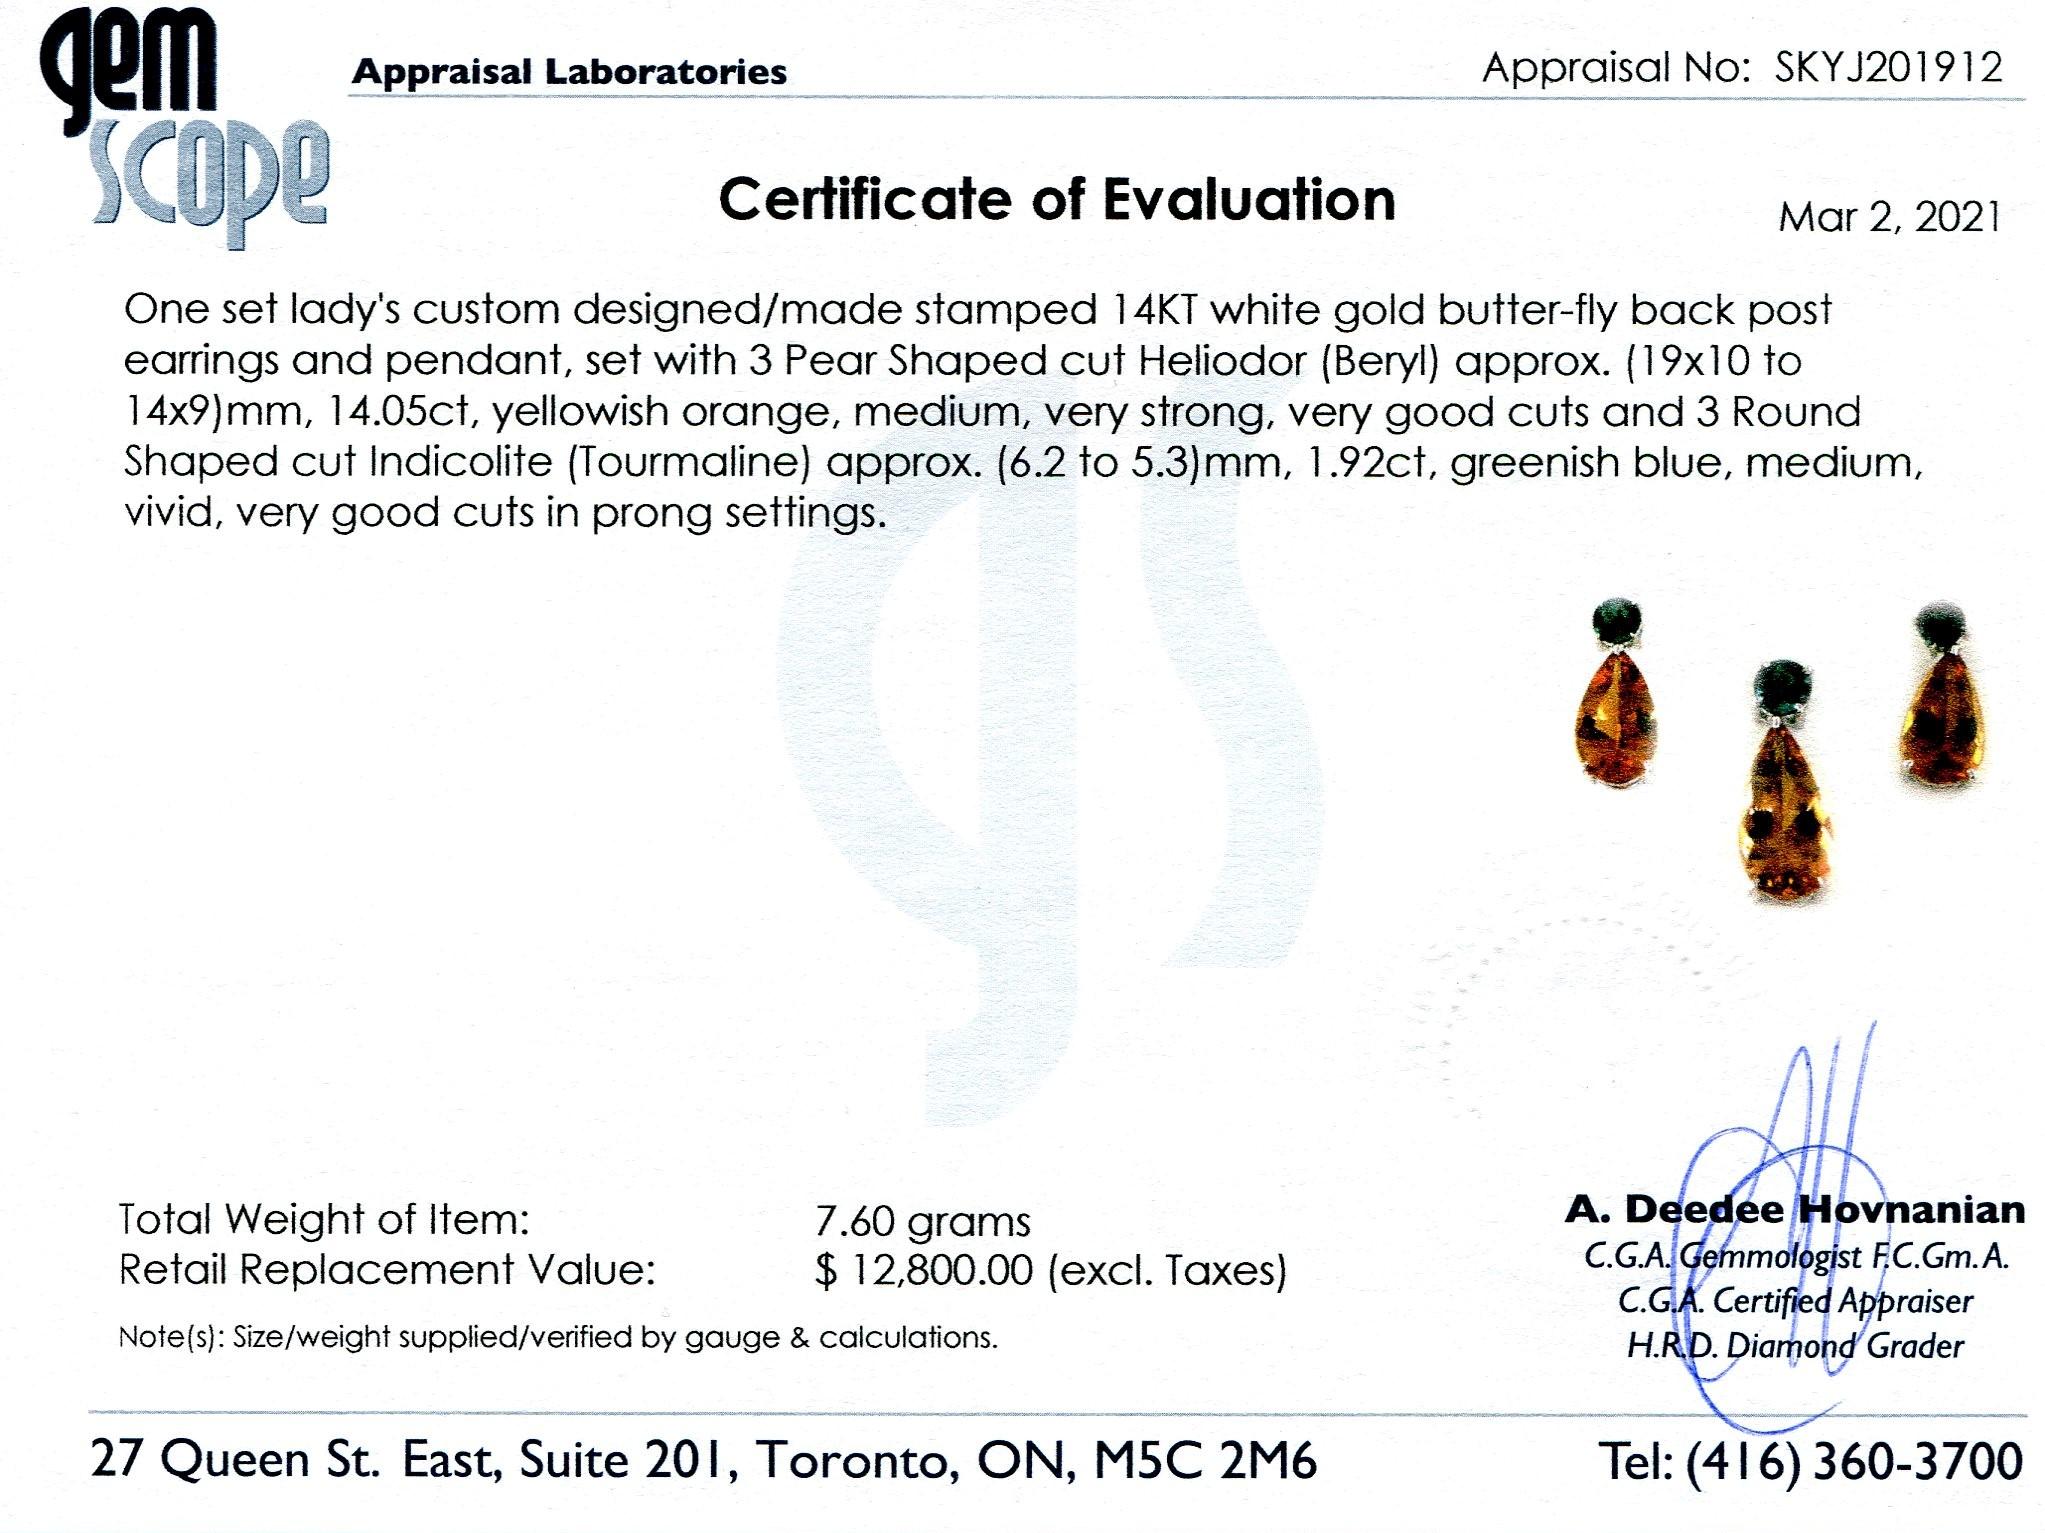 The appraisal reads as follows:

Gem Scope Appraisal Laboratories
Appraisal No: SKYJ201912

Certificate of Evaluation

 

One set lady's custom designed/made stamped 14K white gold butter-fly back post earrings and pendant, set with 3 Pear Shaped